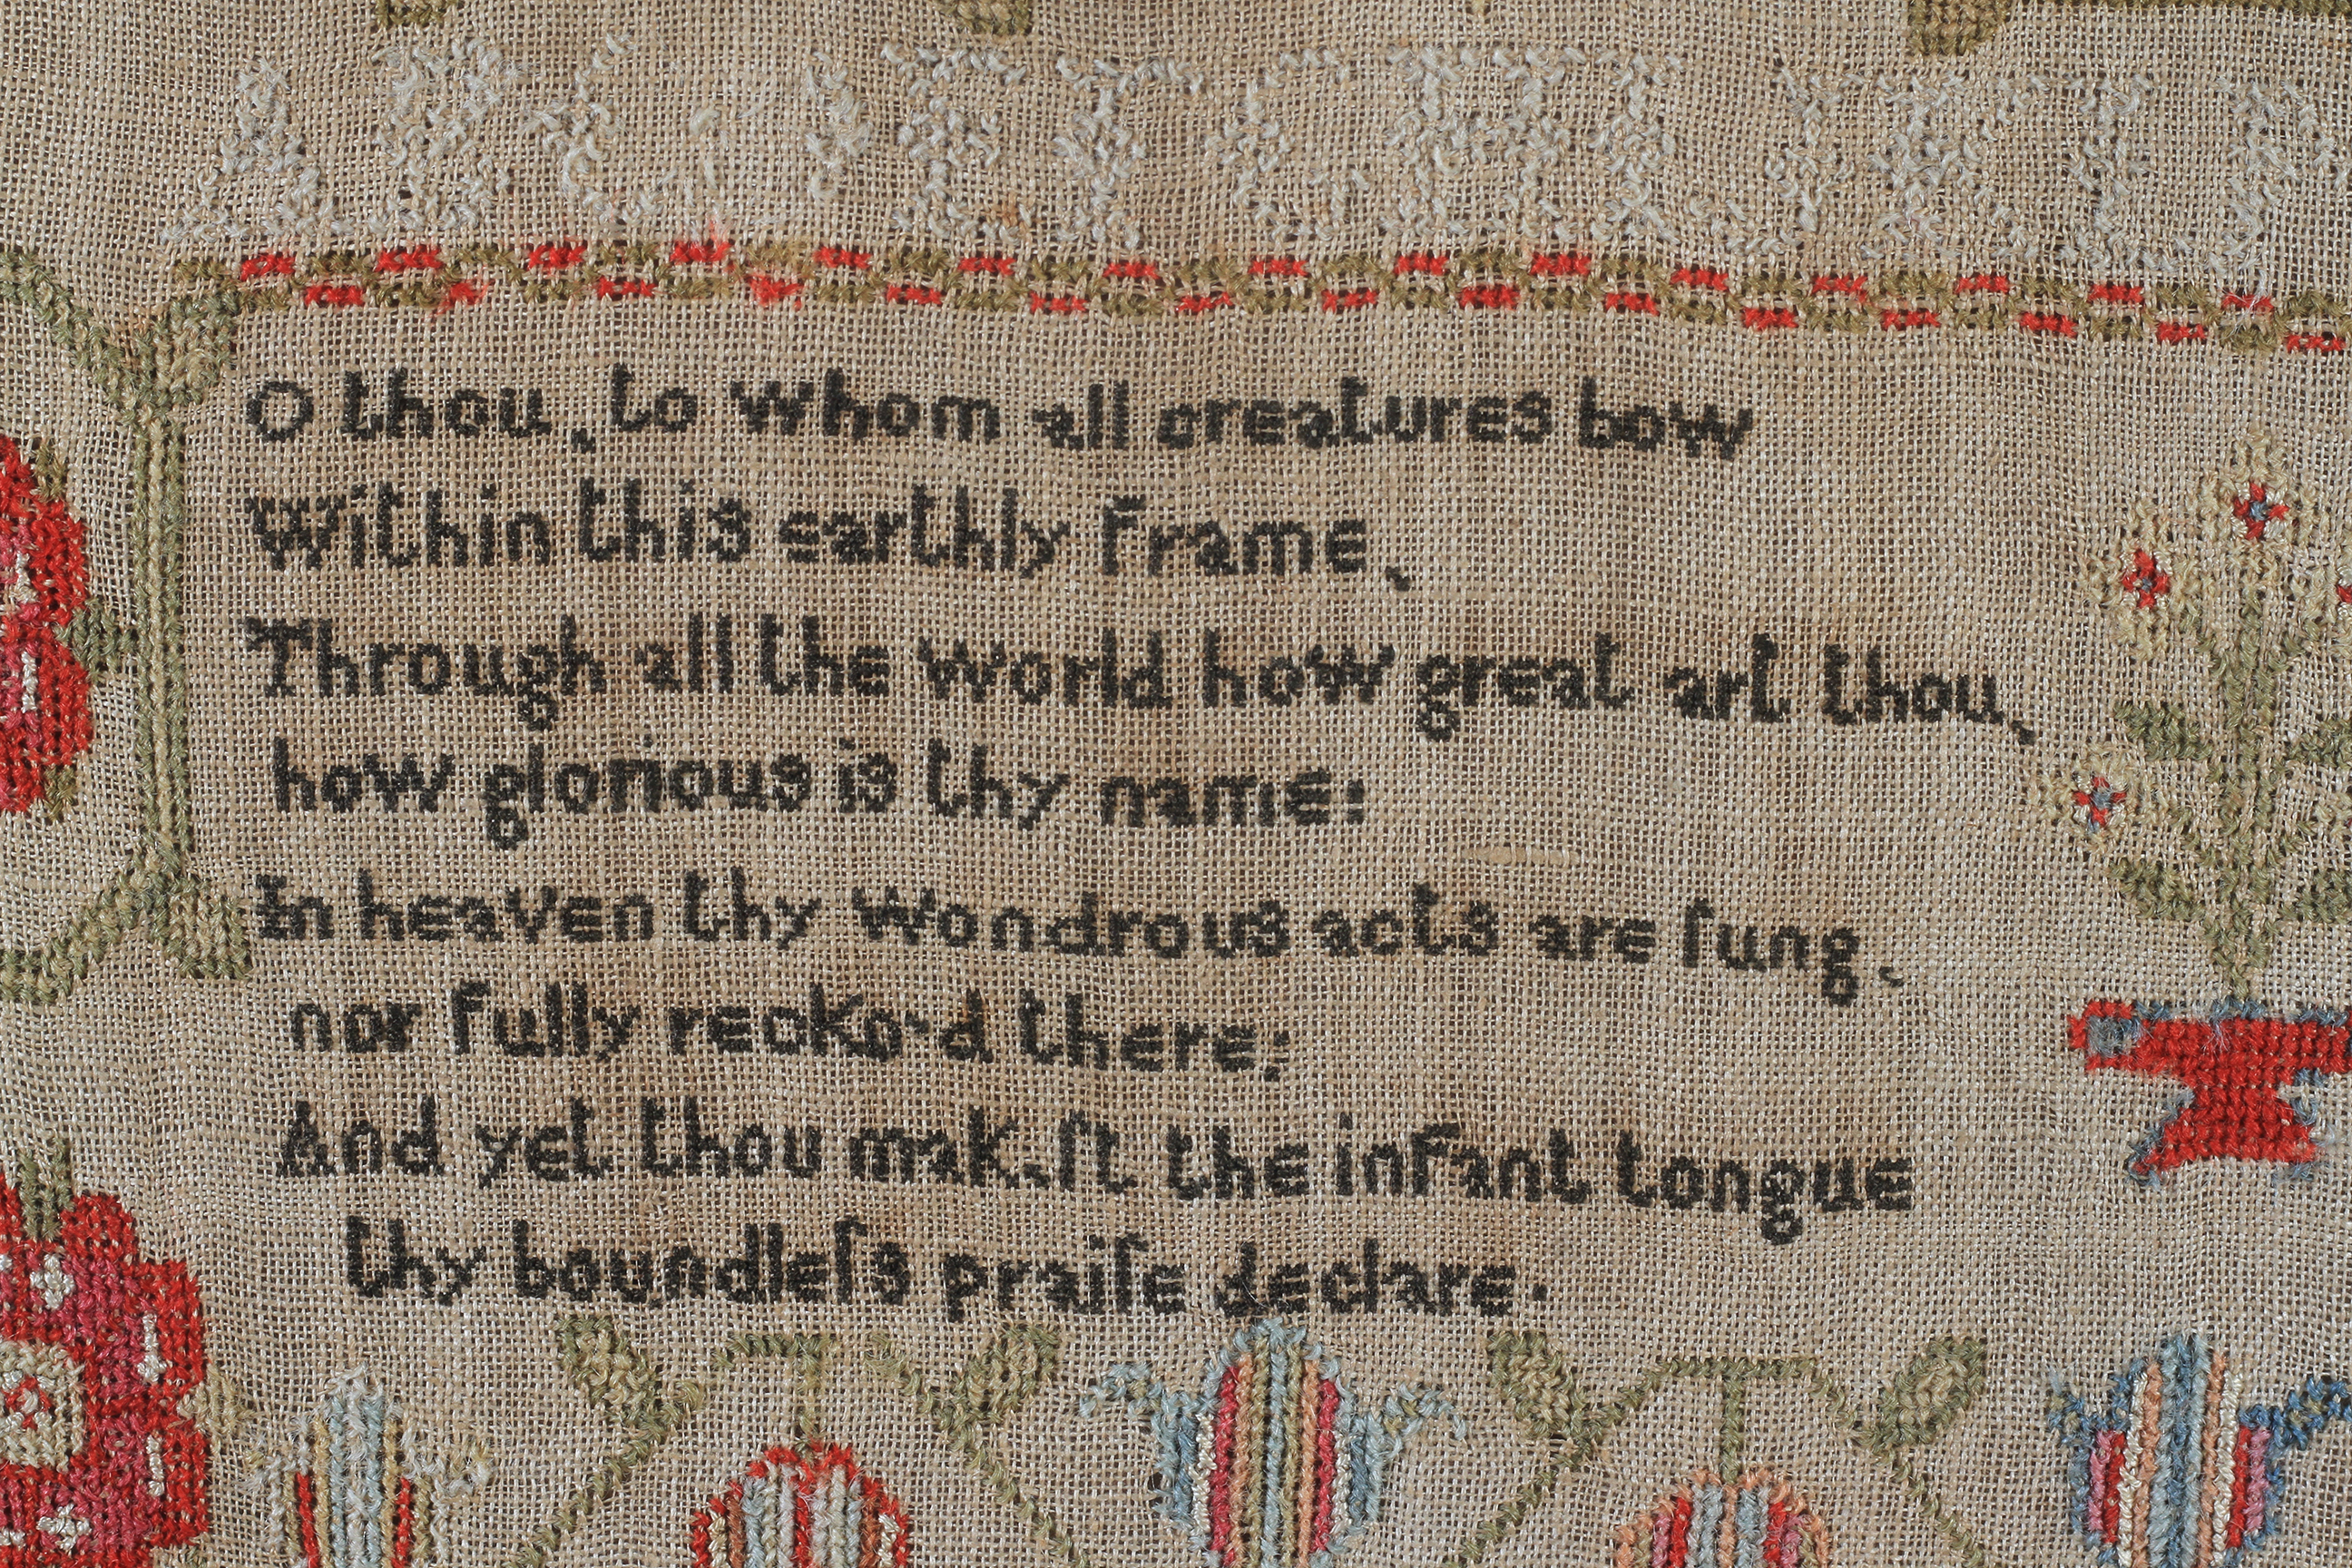 AN EARLY 19TH CENTURY SAMPLER worked by Rebecca Cooper aged 11, 1832, with text, flowering trees and - Image 3 of 4